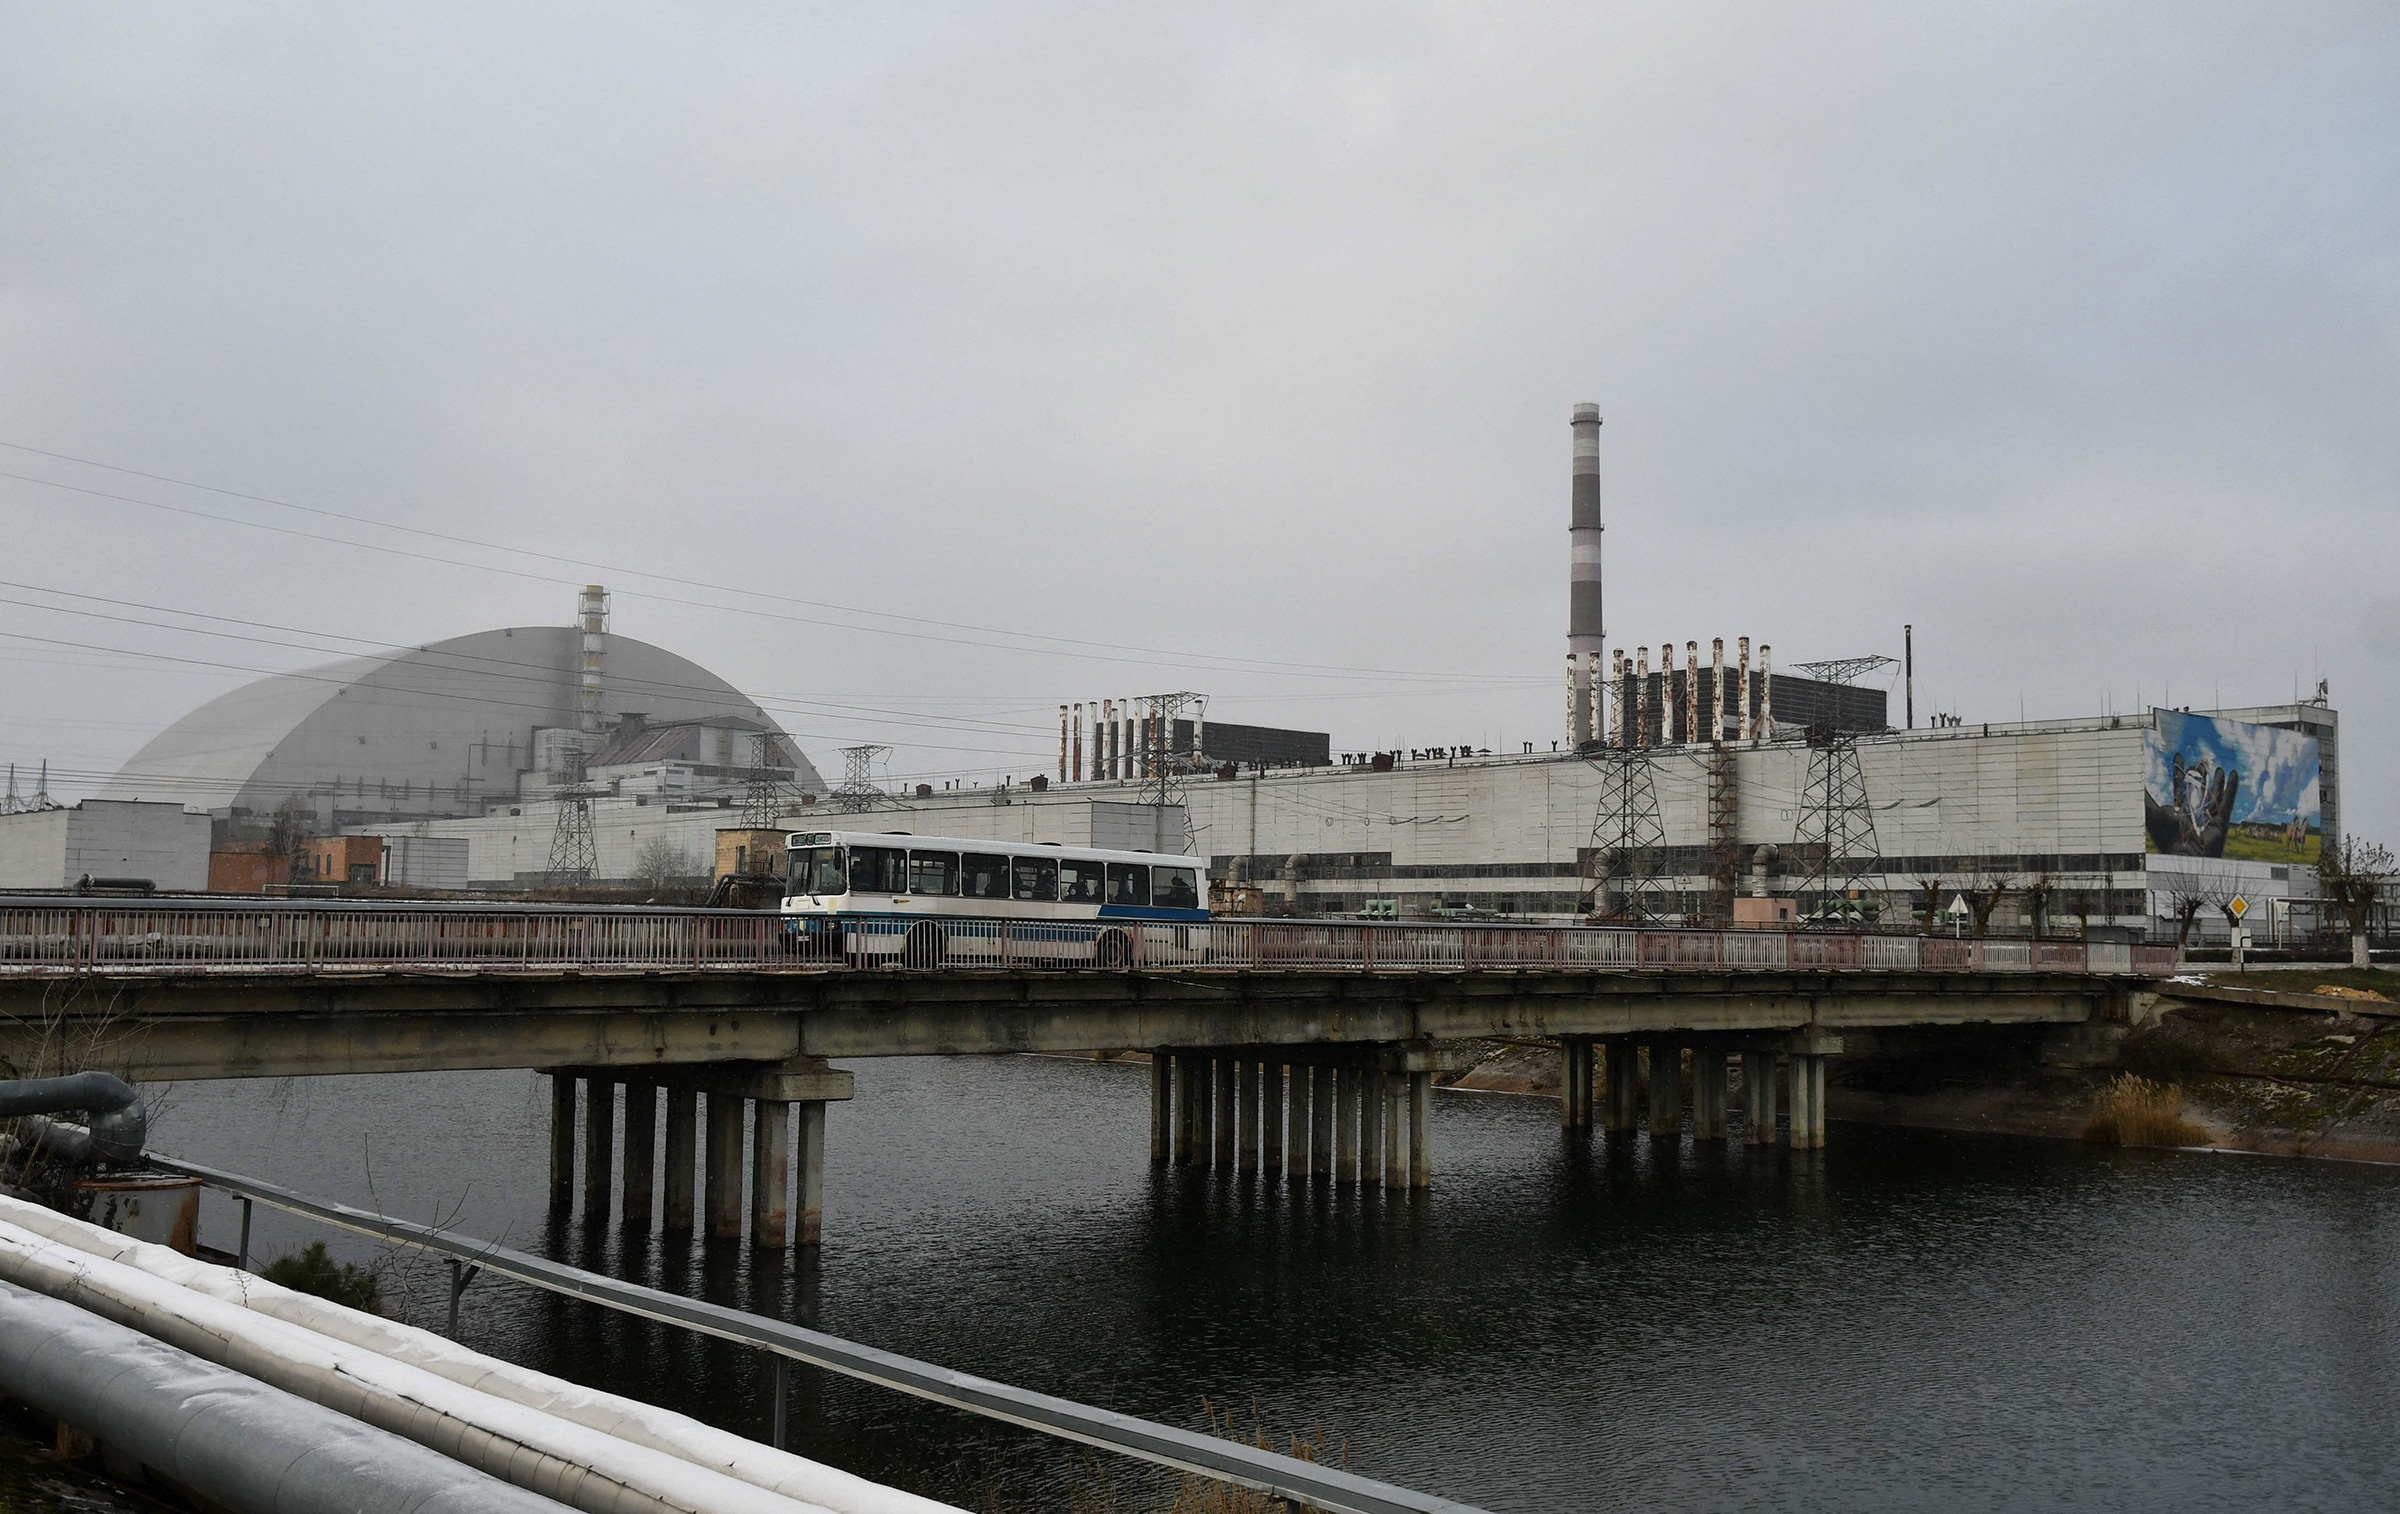 Chernobyl nuclear power plant in Ukraine on Dec. 8, 2020.